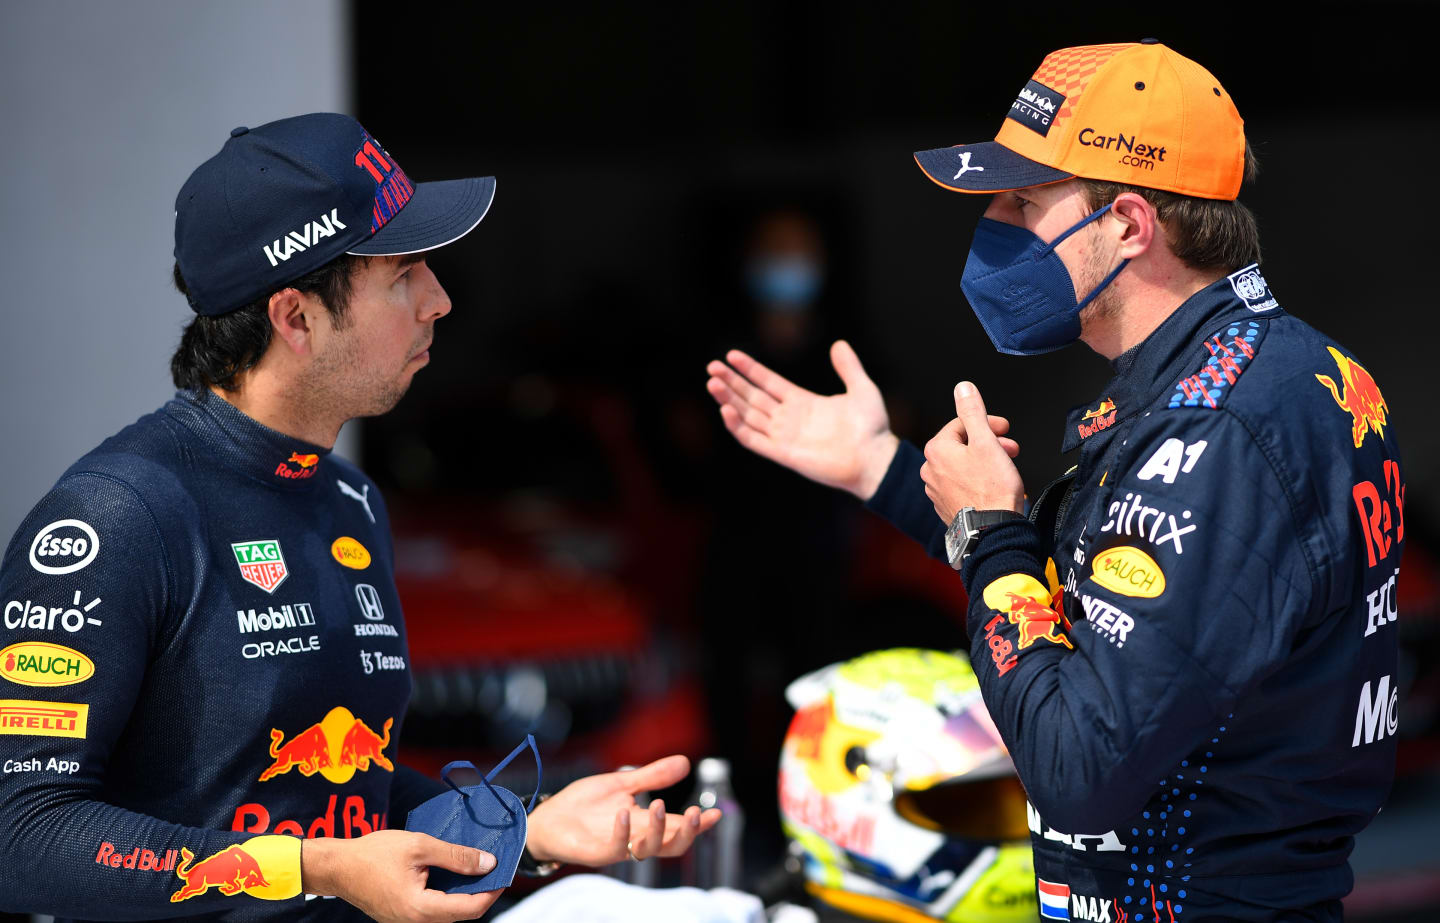 SPIELBERG, AUSTRIA - JULY 03: Pole position qualifier Max Verstappen of Netherlands and Red Bull Racing and third place qualifier Sergio Perez of Mexico and Red Bull Racing celebrate in parc ferme during qualifying ahead of the F1 Grand Prix of Austria at Red Bull Ring on July 03, 2021 in Spielberg, Austria. (Photo by Christian Bruna - Pool/Getty Images)